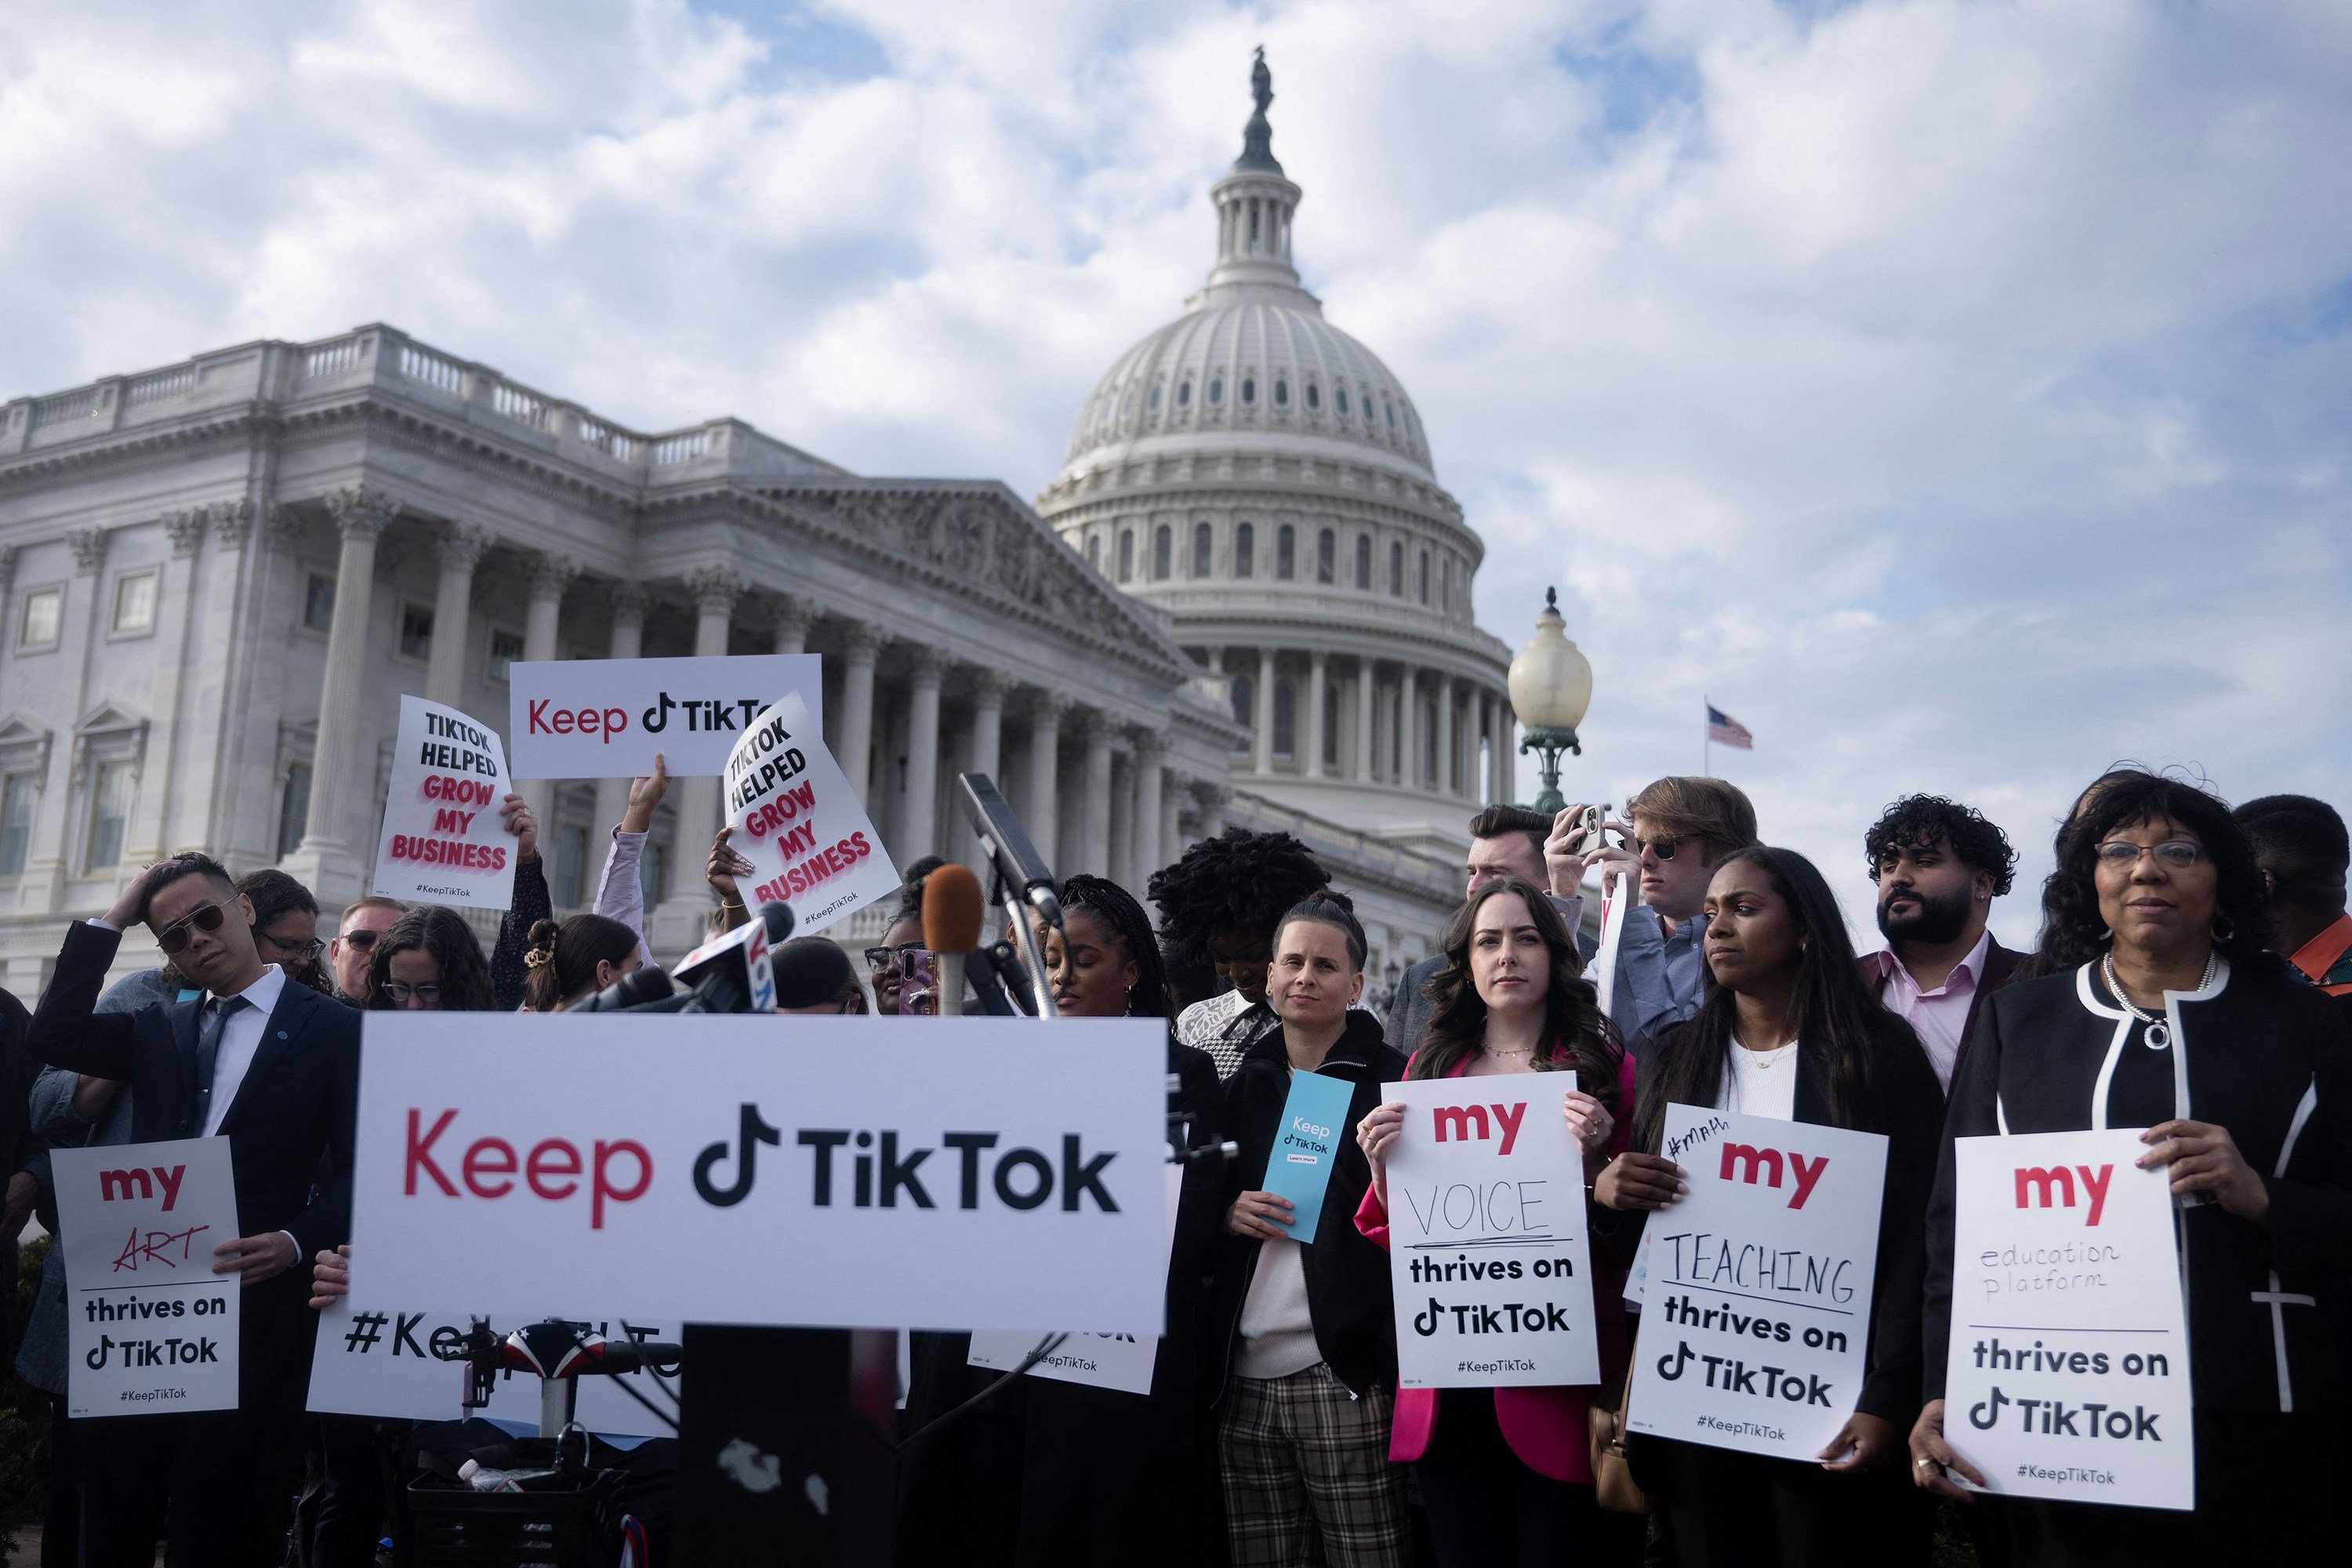 People opposed to a TikTok ban gathered in Washington in March. Photo: AFP/Getty Images/TNS